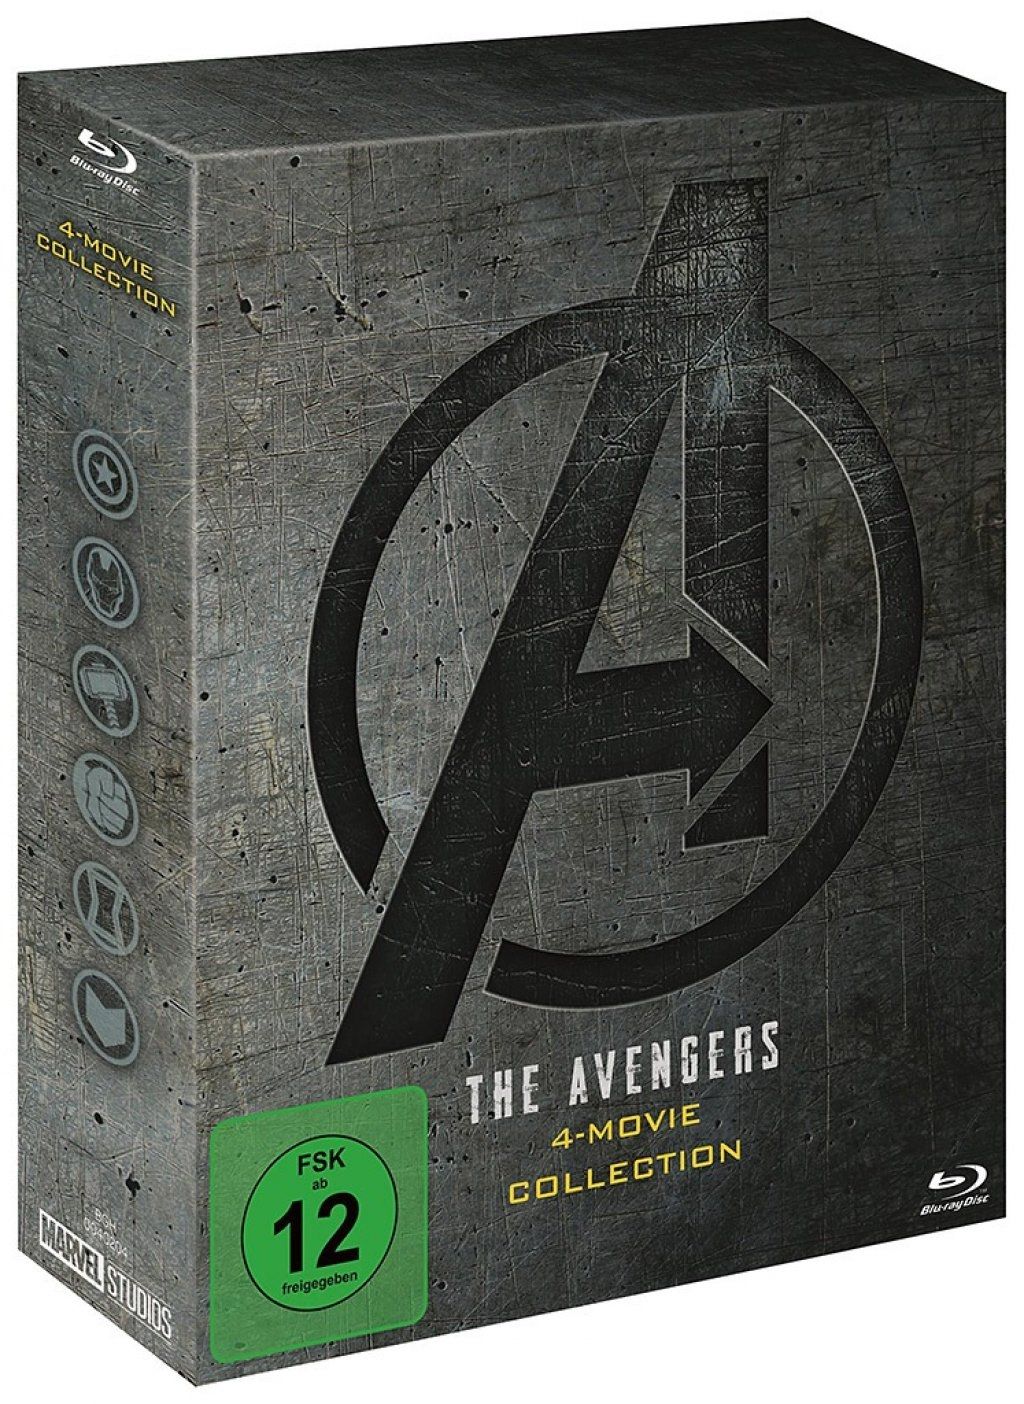 Avengers, The - 4 Movie Collection (5 Discs) (BLURAY)